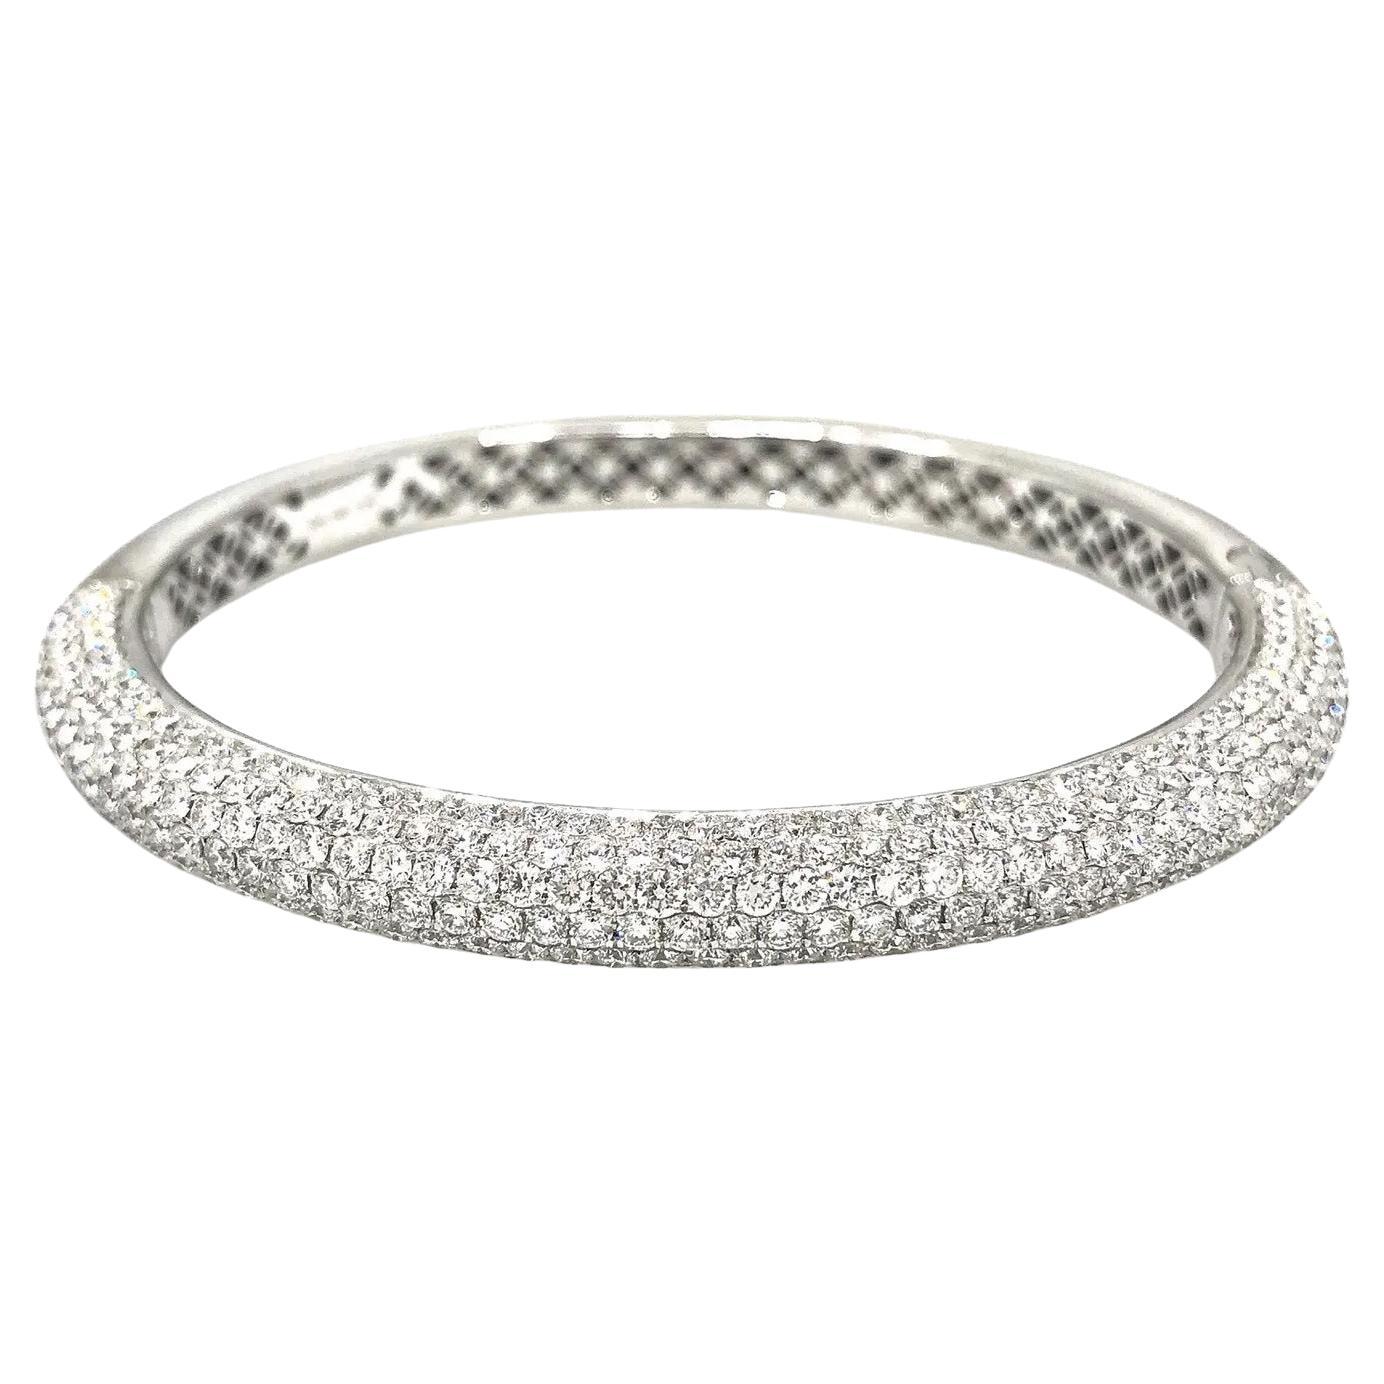 Diamond Pave Bangle Bracelet 8.28 Carats Total Weight in 18k White Gold